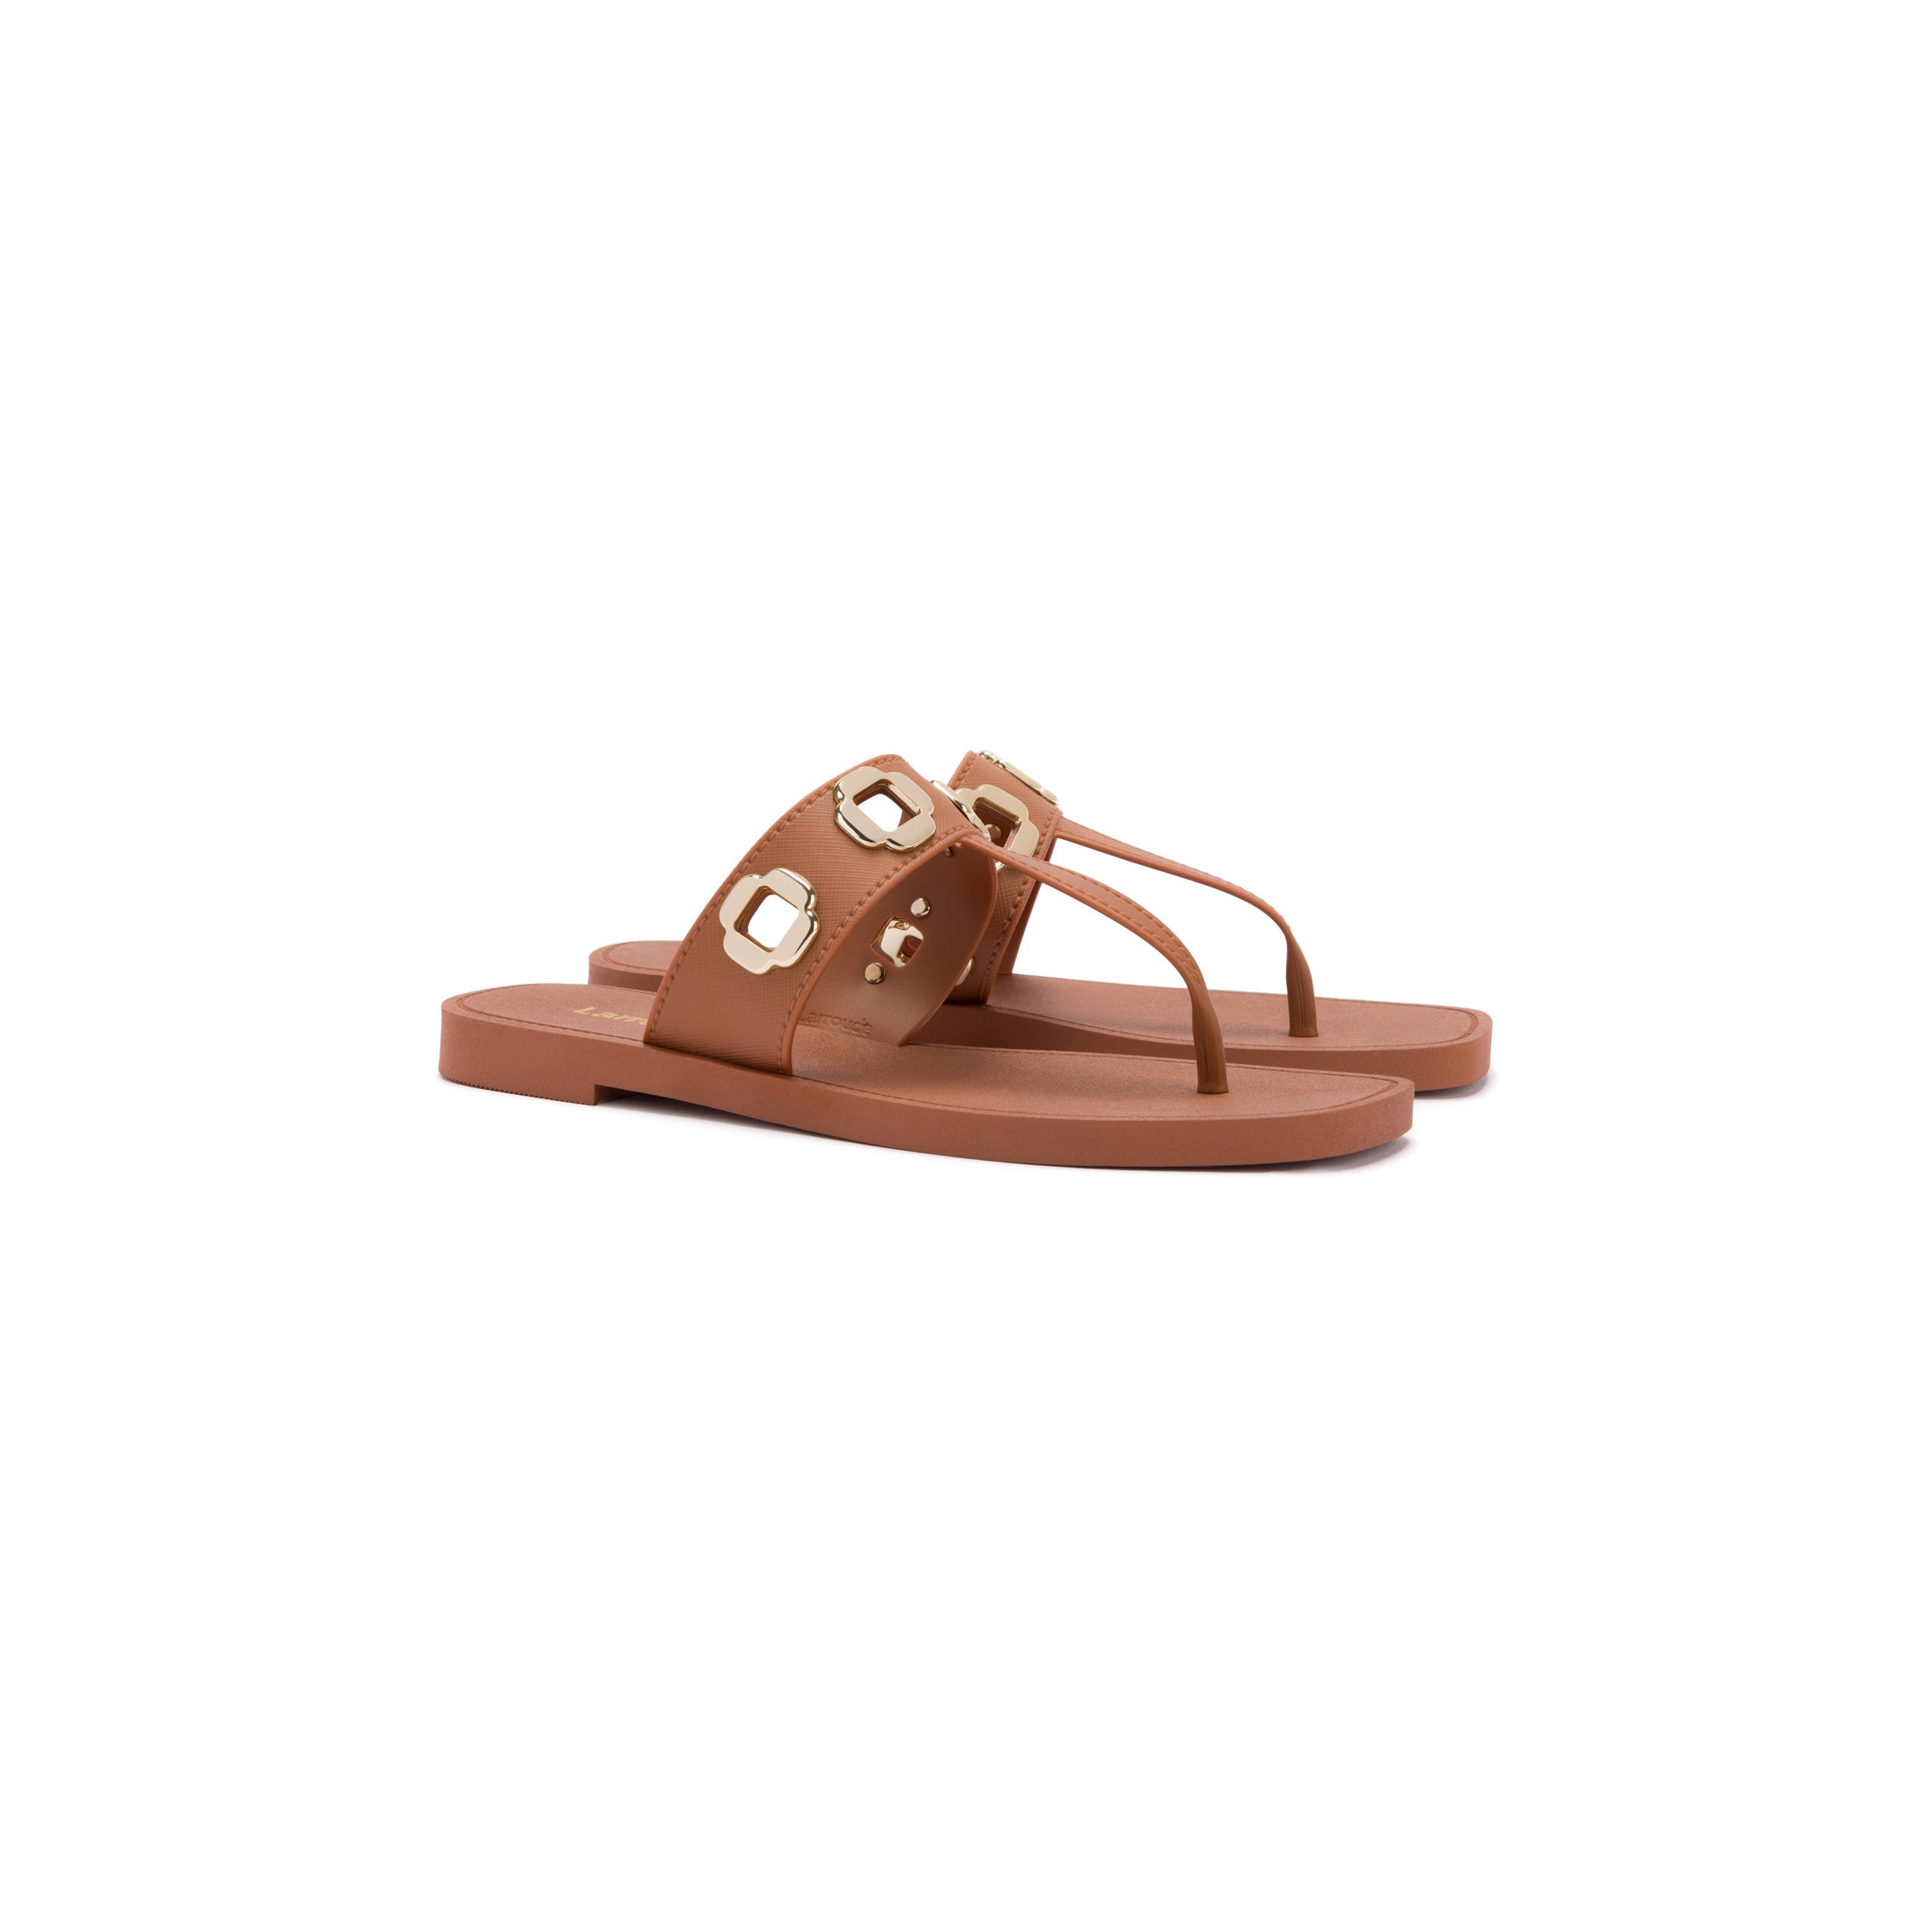 A pair of caramel t-strap sandals with a thick strap over the foot, adorned with large, round, golden embellishments. The Larroudé bestseller, Milan S in Caramel PVC, also features a thong-style strap between the toes. The sandals are set against a plain white background.